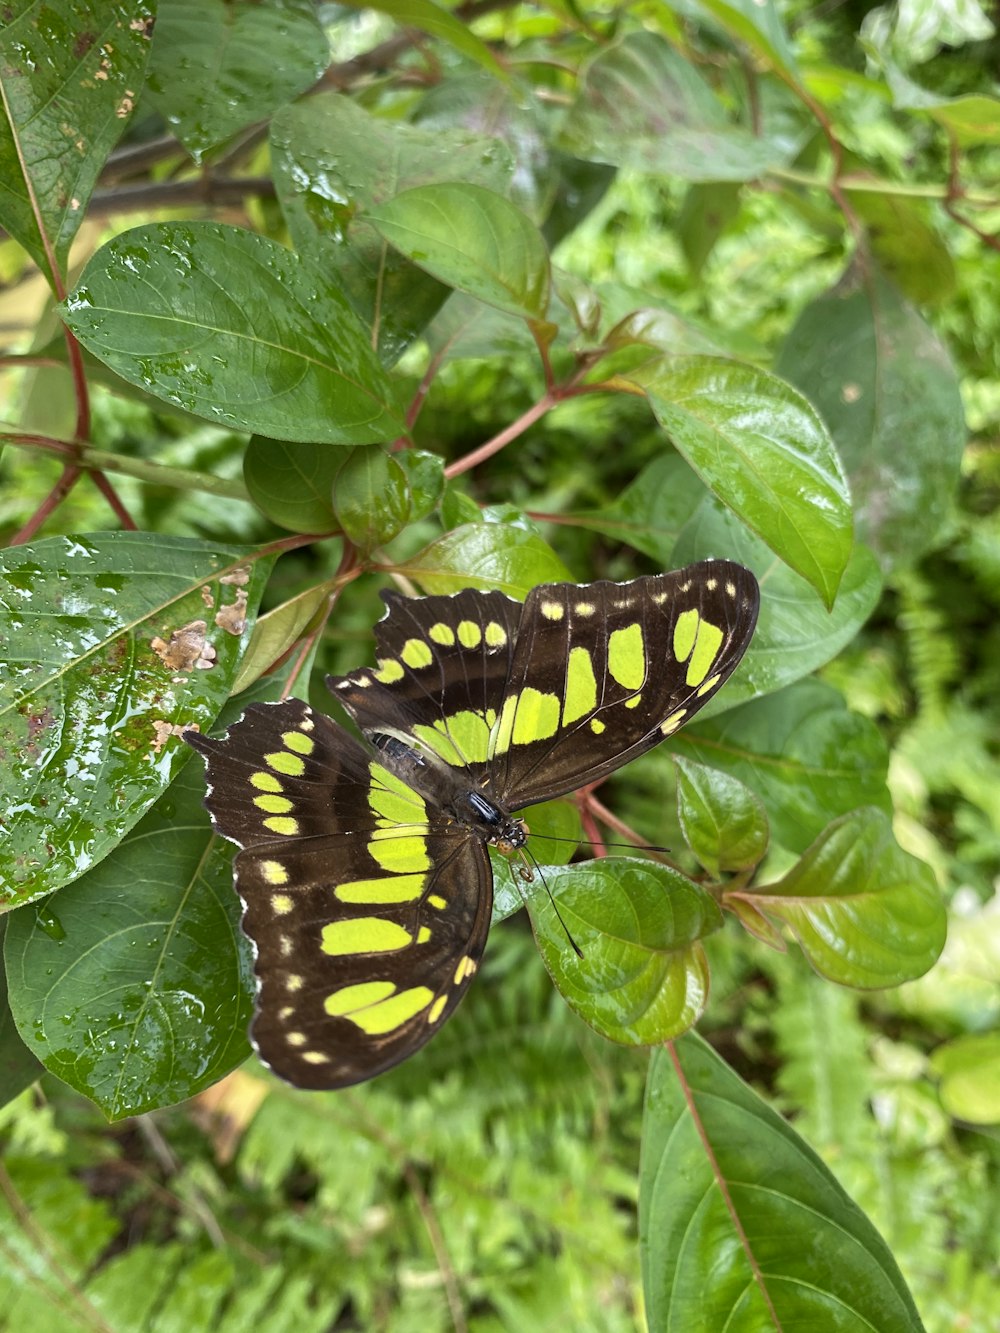 black and yellow butterfly on green leaf during daytime photo – Free .  irausquin boulevard Image on Unsplash